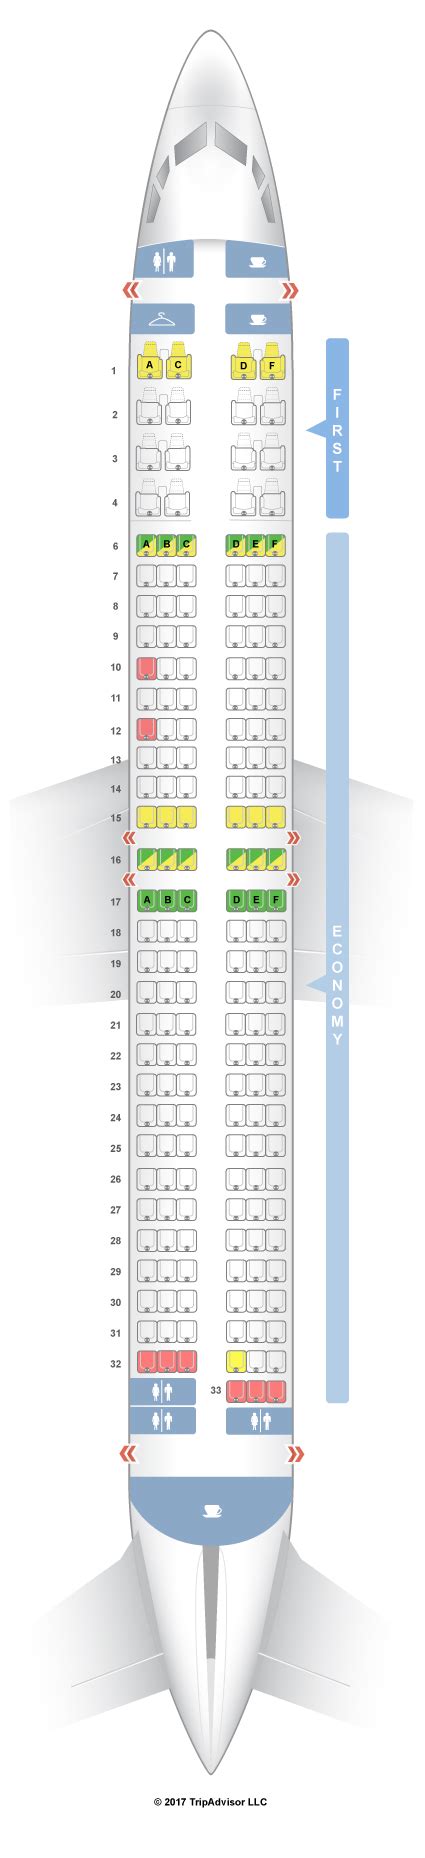 Blog. Add a Review. Add a Photo. 0/5.0. Alaska Airlines Boeing 737 900 Seat Map. · Airbus A319 · Airbus A320 · Airbus A320 (v2) · Airbus A321 · Boeing 737 MAX 9 · Boeing 737-400 · Boeing 737-400 (Combi) · Boeing 737-700 · Boeing 737-800 · Boeing 737-800 (Premium Class) Boeing 737-900 · Boeing 737-900 (ER) · Boeing 737-900 (ER .... 